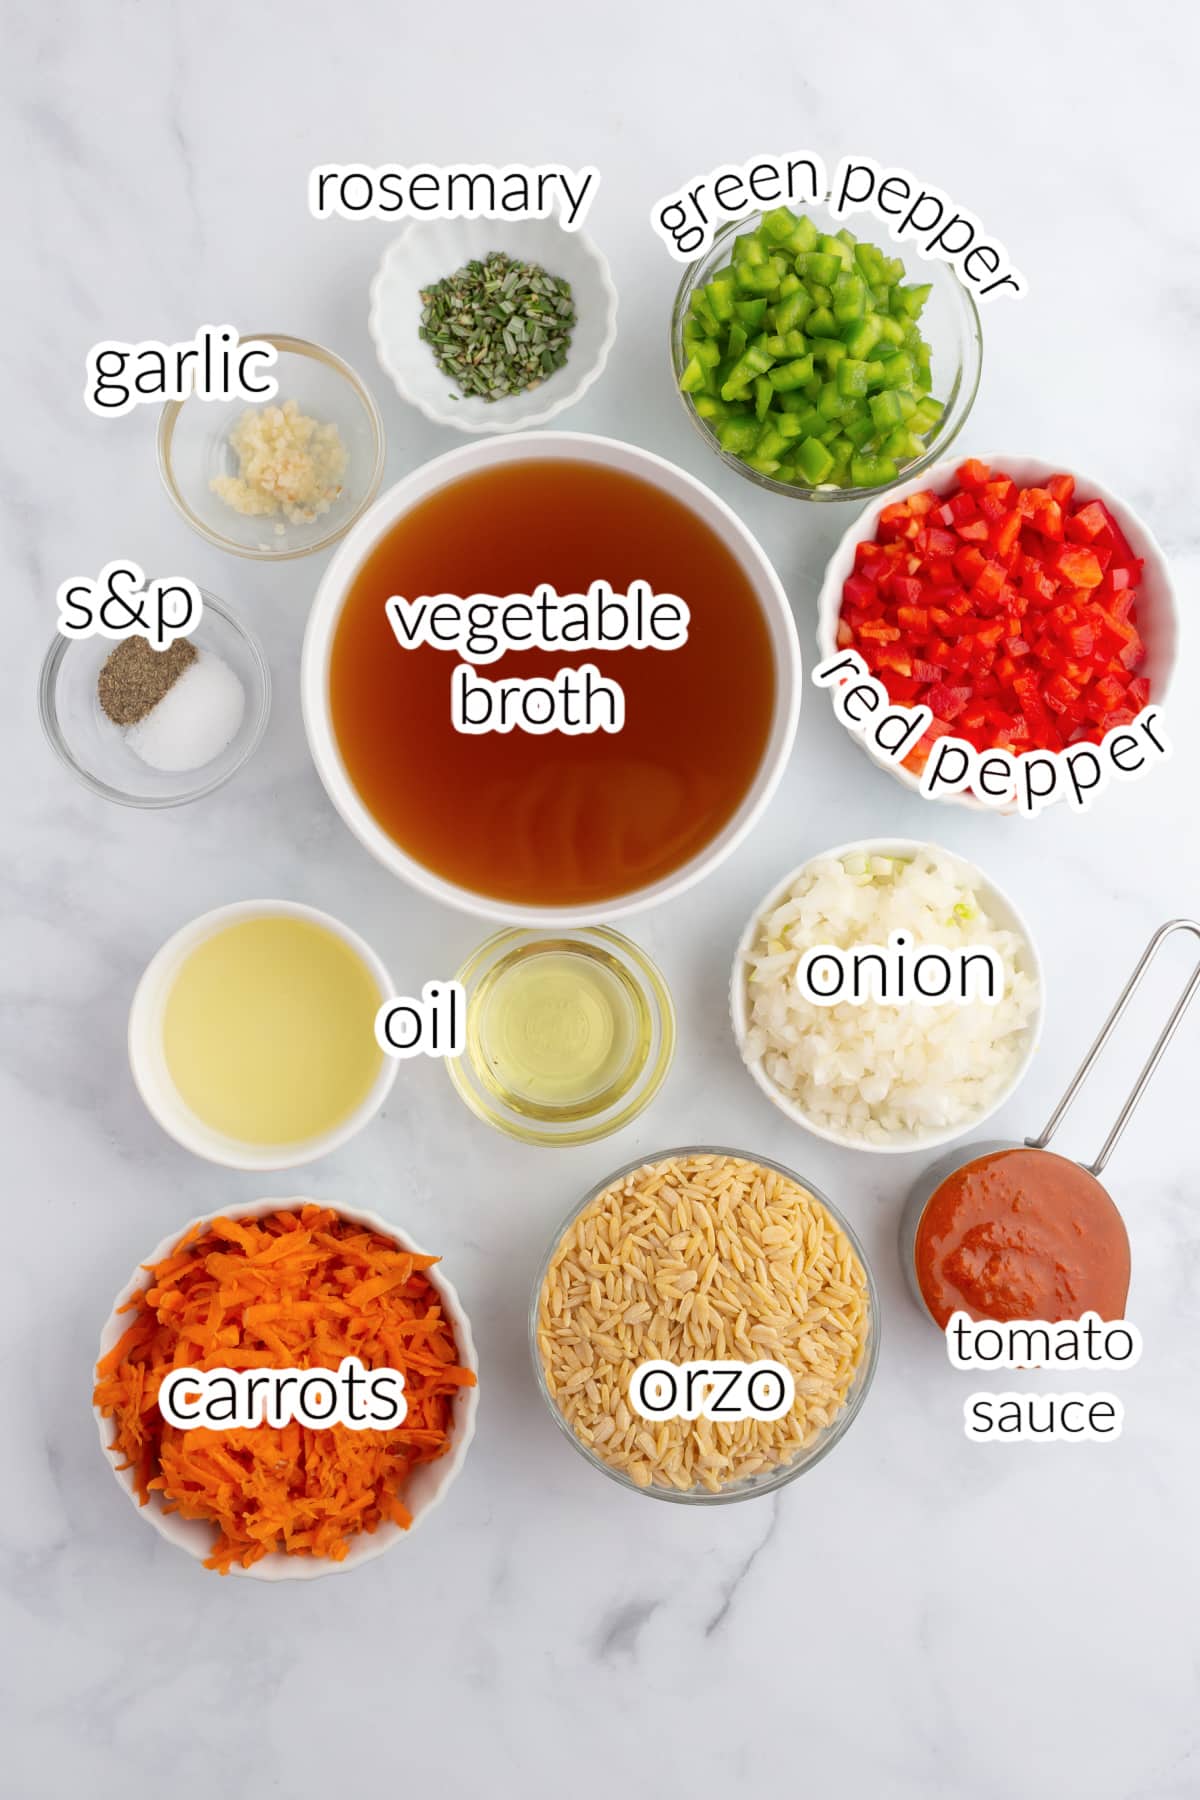 vegetarian orzo ingredients on a marble surface.